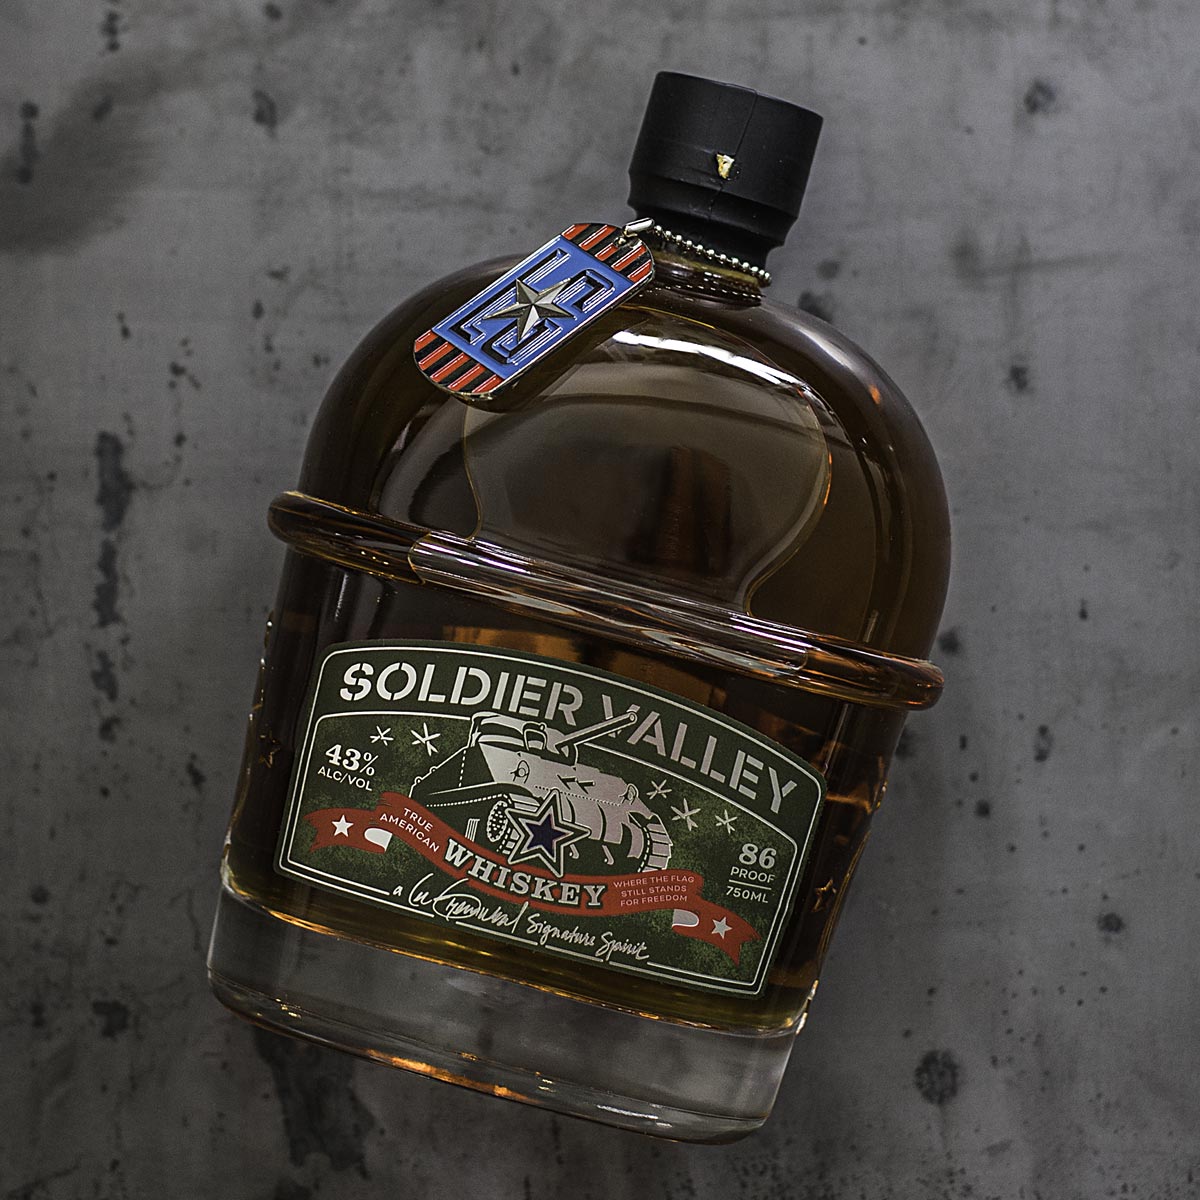 Soldier Valley Whiskey